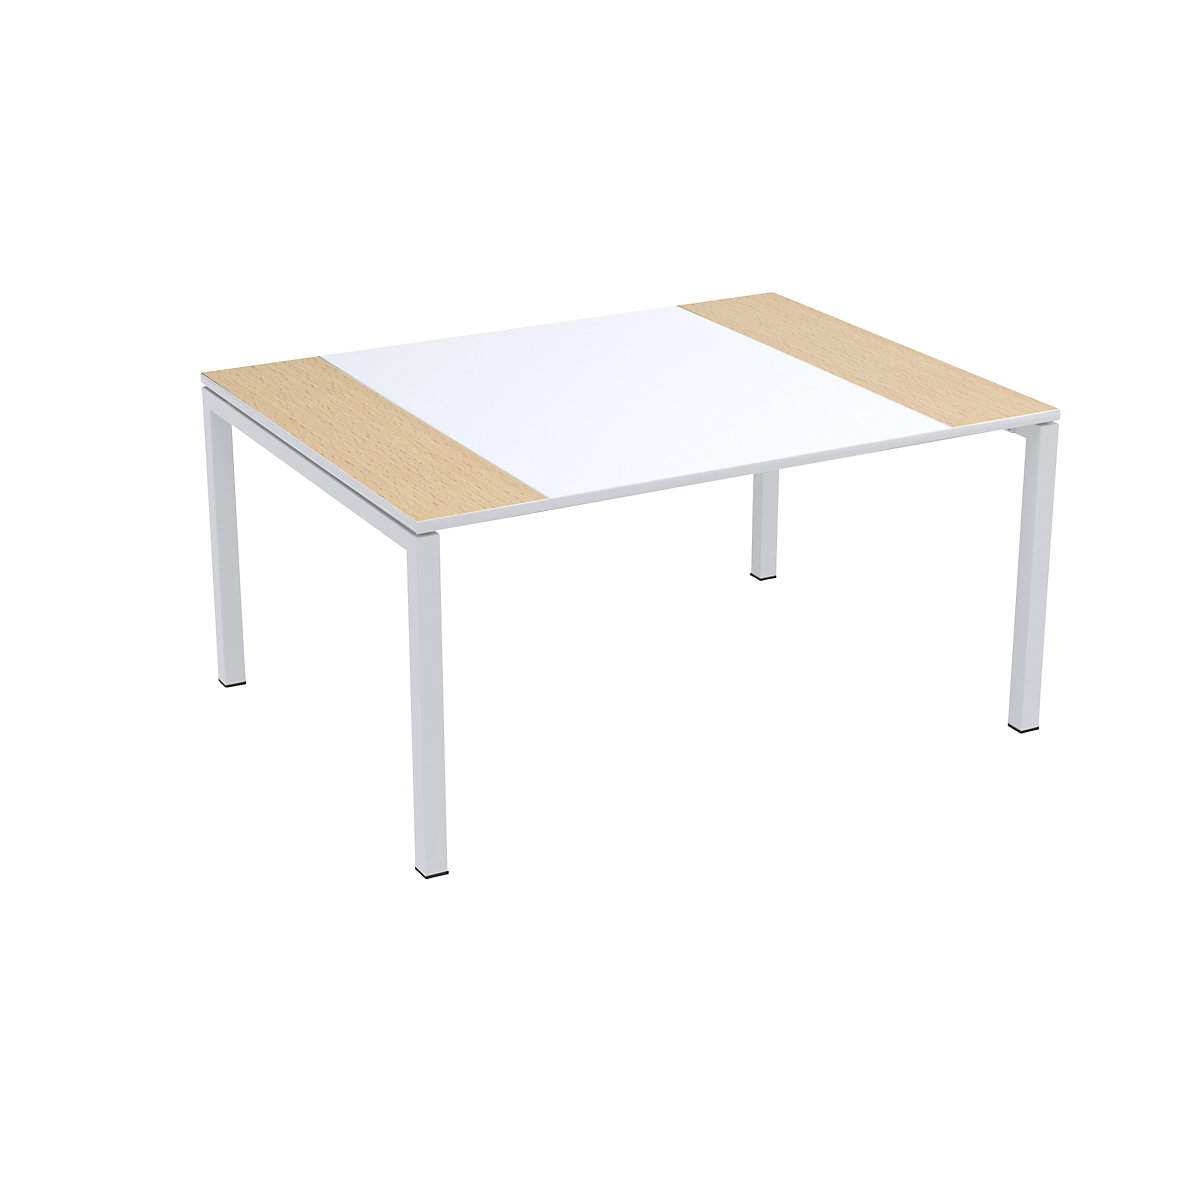 easyDesk® conference table – Paperflow, HxWxD 750 x 1500 x 1160 mm, white/beech finish-7